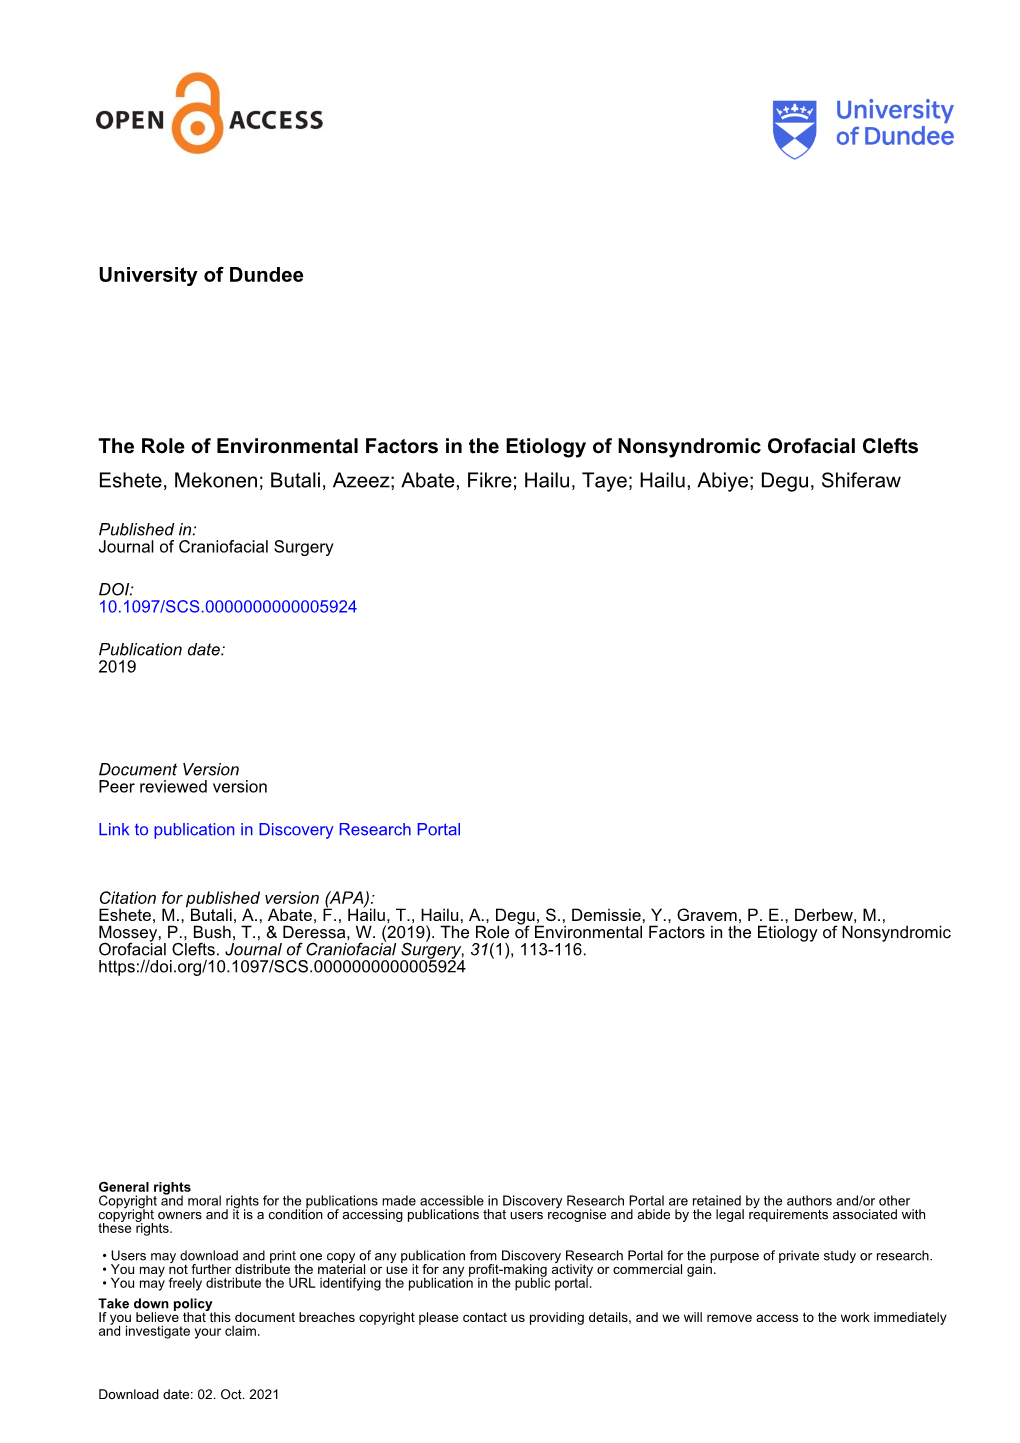 University of Dundee the Role of Environmental Factors in The